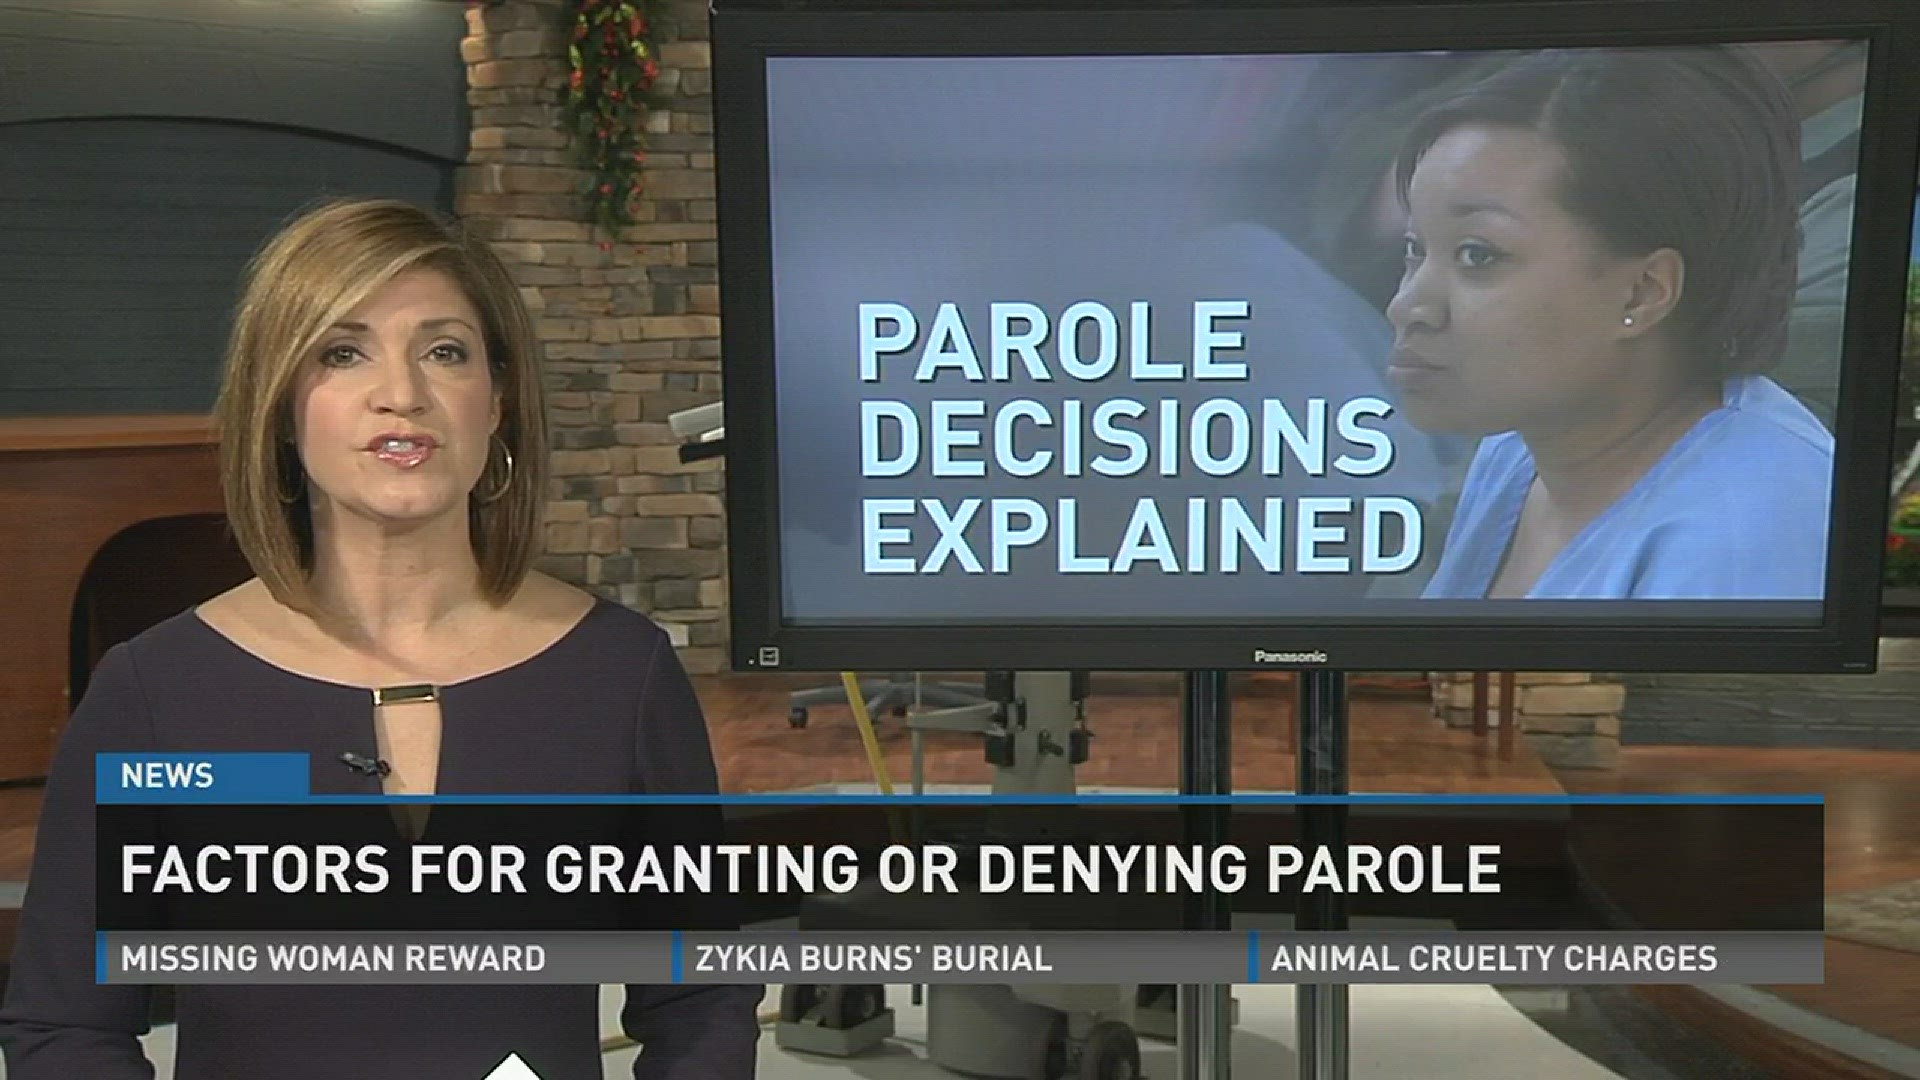 Factors considered when granting or denying parole